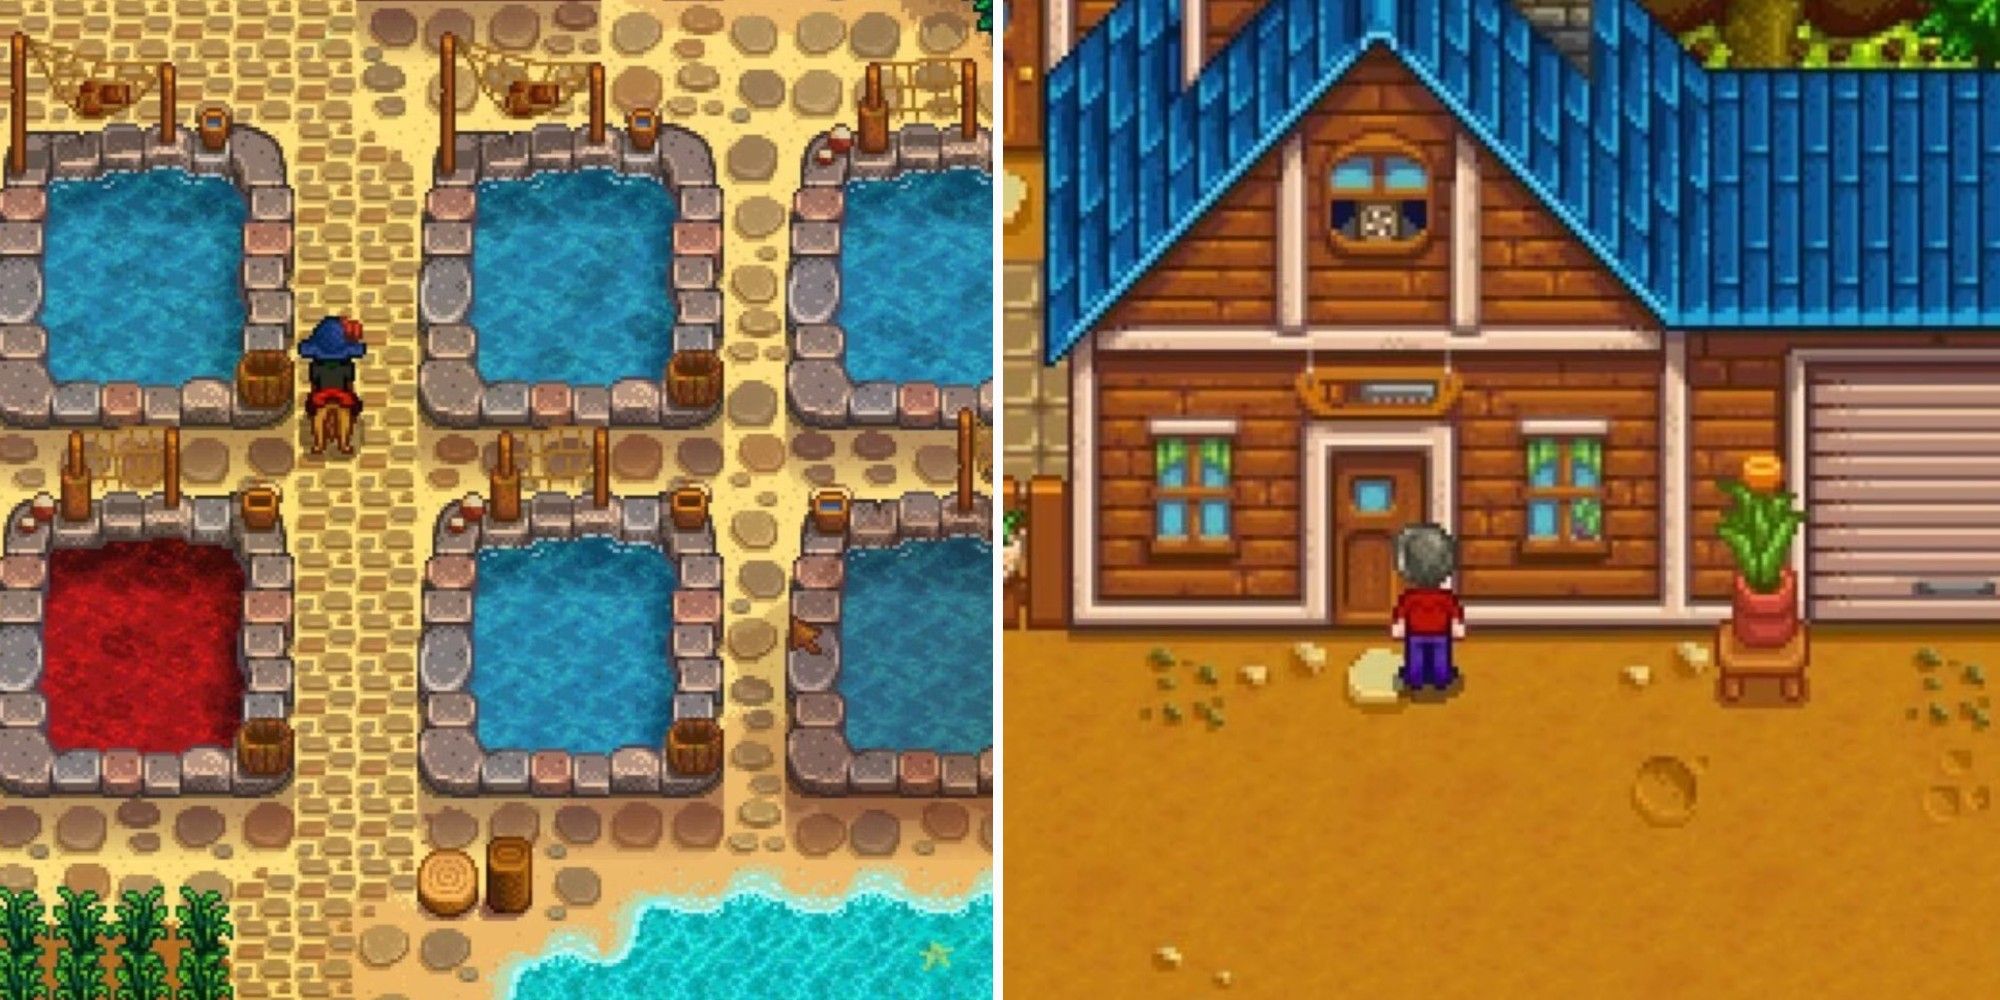 Several small fishing ponds and a lumberjacks house in Stardew Valley the video game